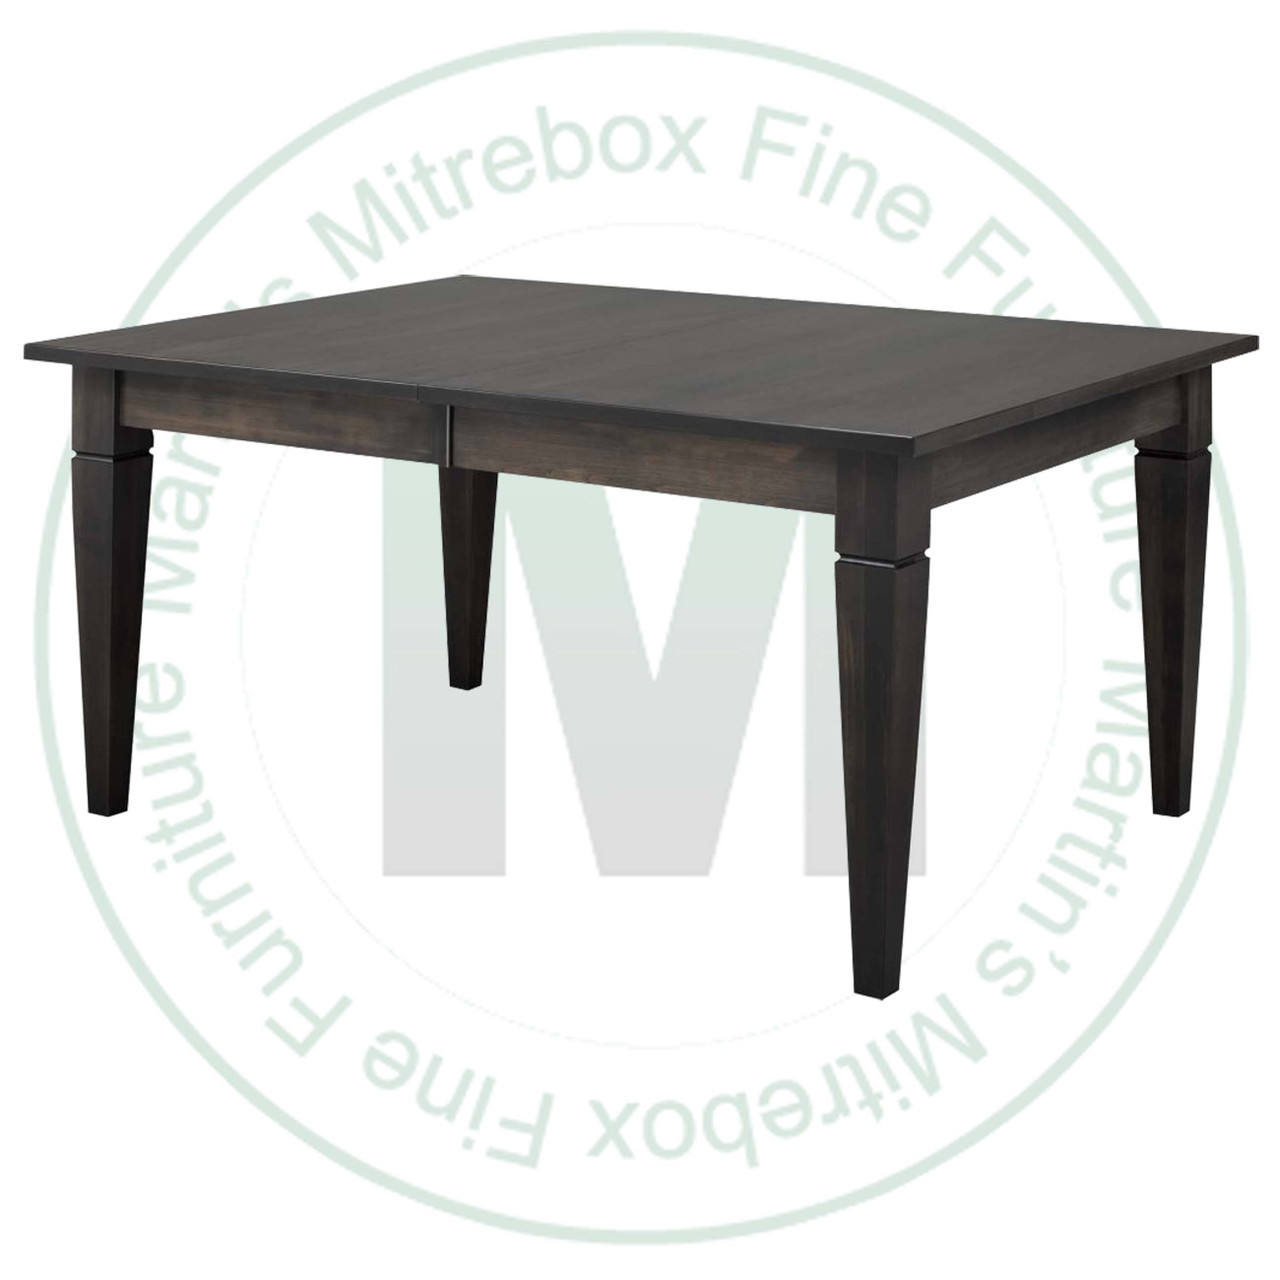 Maple Reesor Extension Harvest Table 36''D x 60''W x 30''H With 3 - 12'' Leaves Table Has 1 3/4'' Thick Top